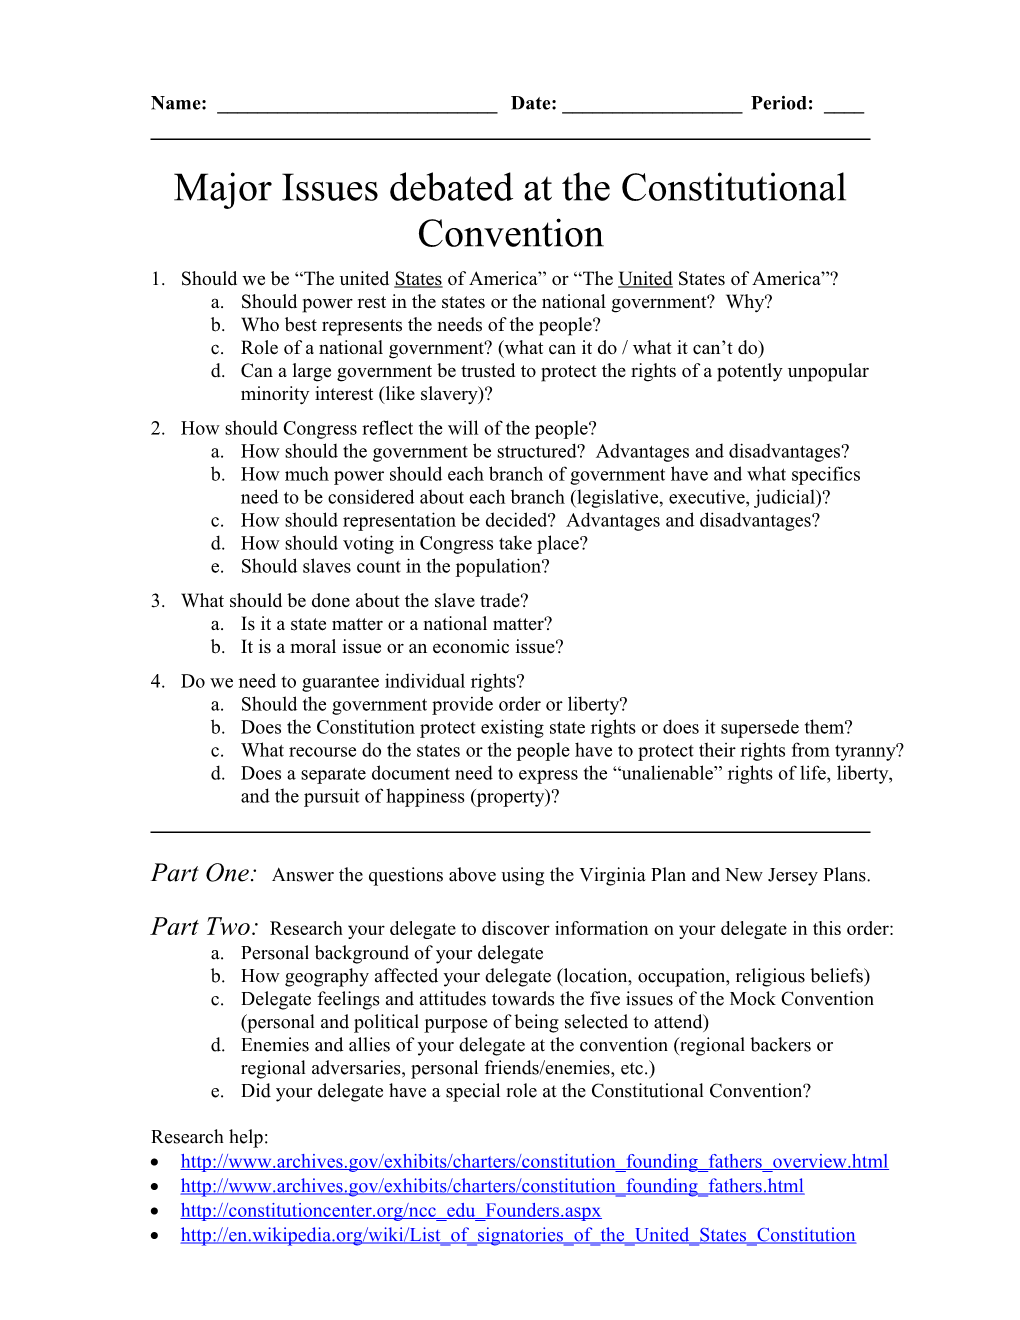 Major Issues Debated at the Constitutional Convention